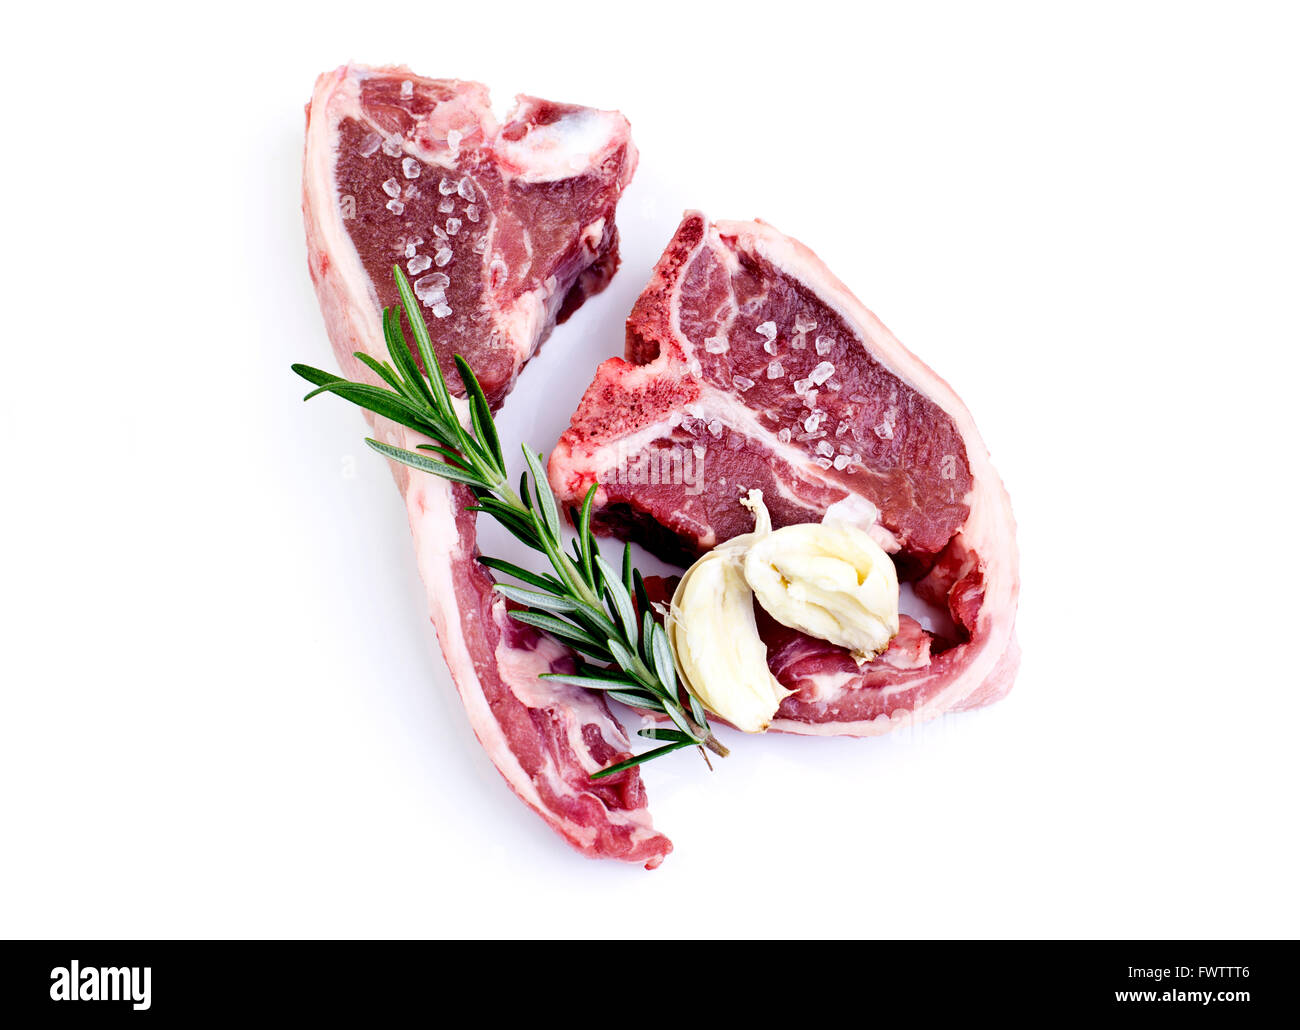 Raw lamb loin chops with rosemary, garlic and salt isolated over white background Stock Photo